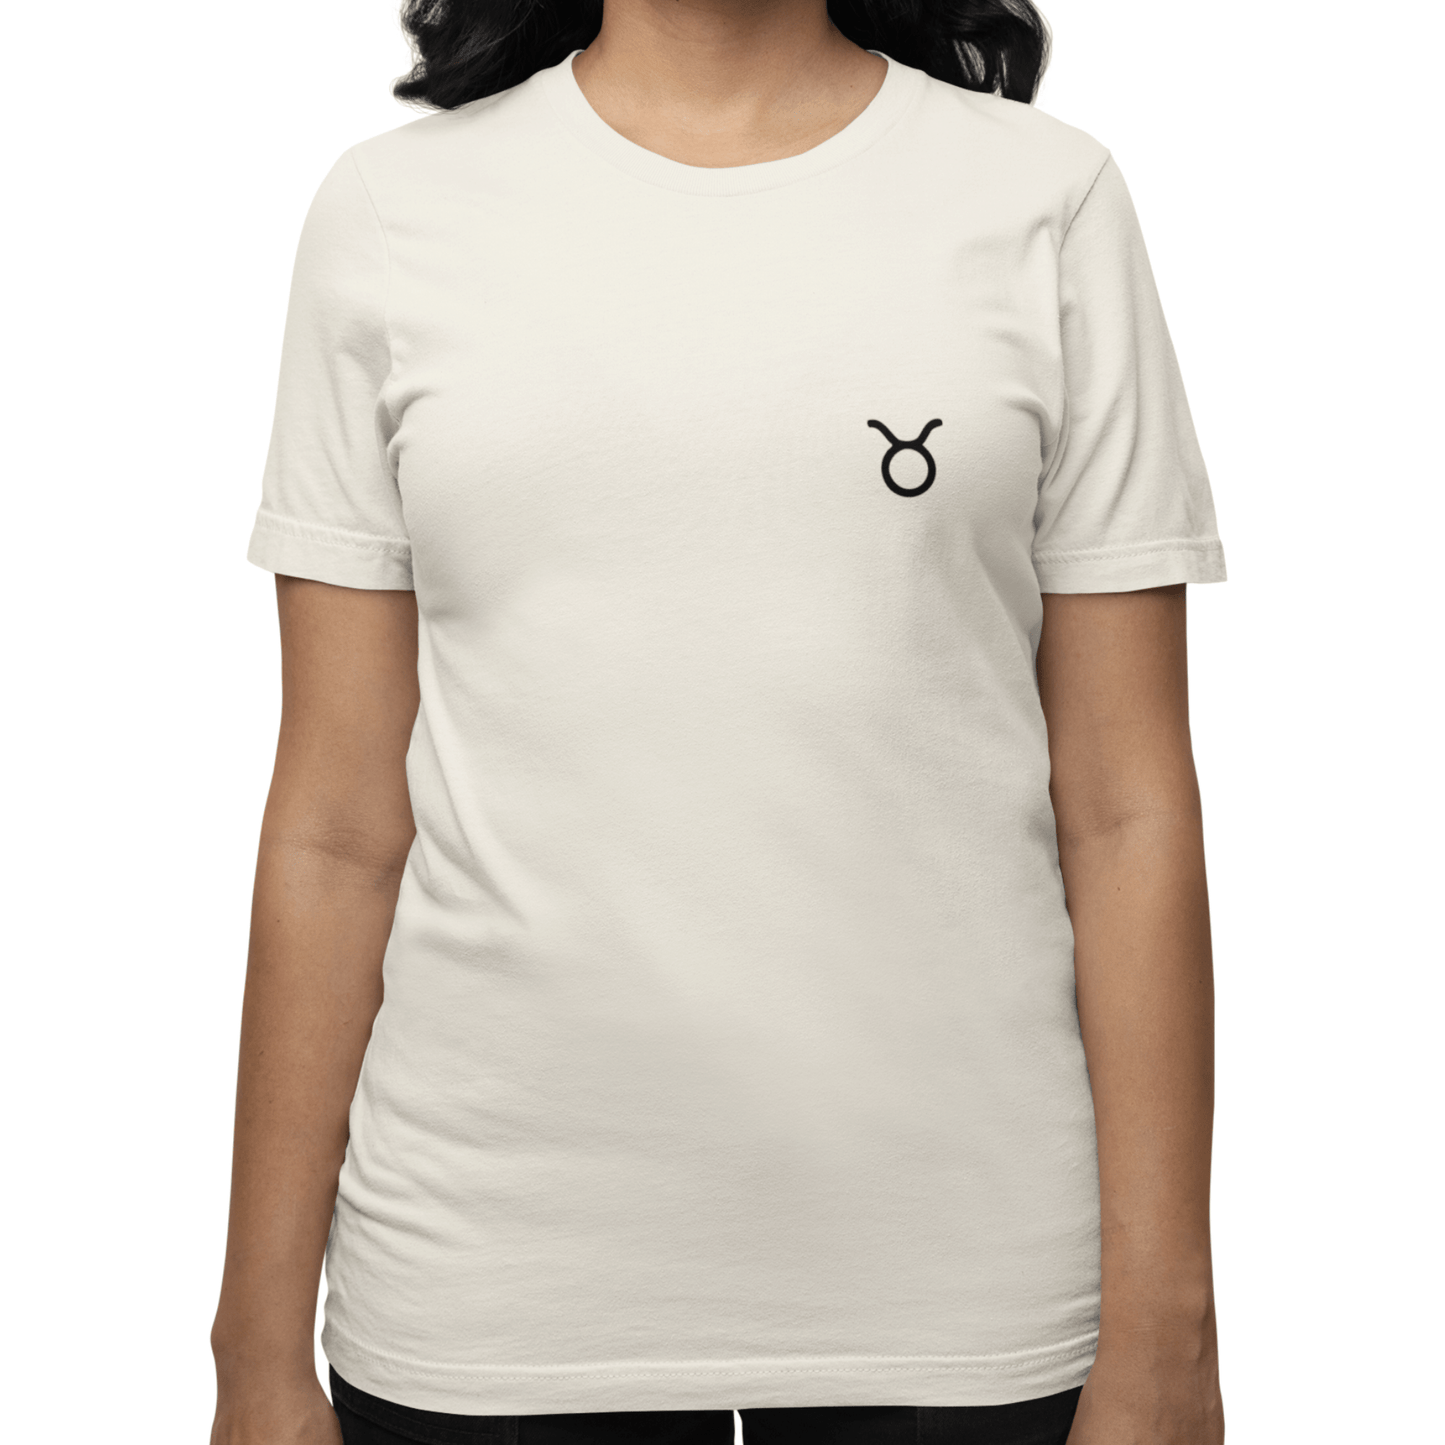 T-Shirt Taurus Zodiac Essence T-Shirt: Sophistication Meets Comfort for the Grounded Soul